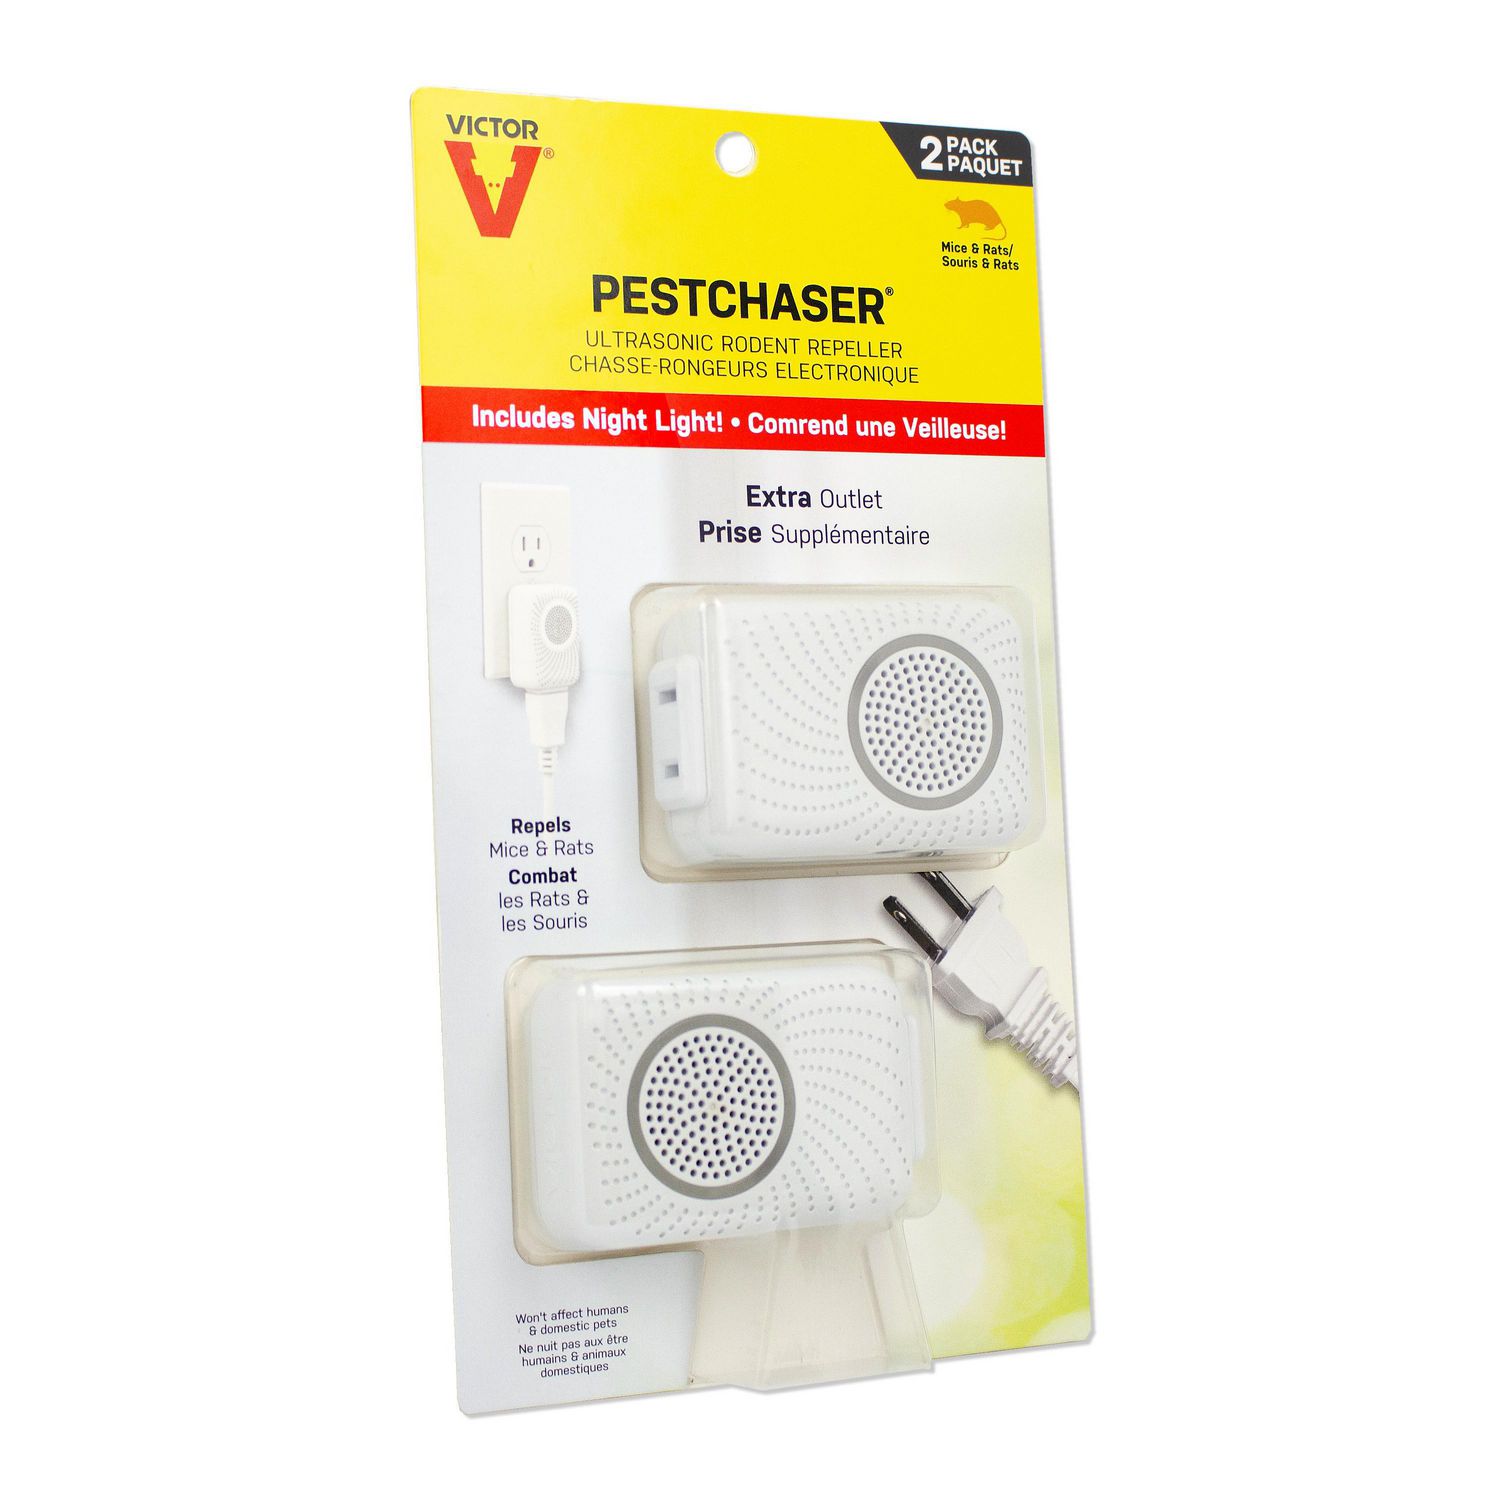 Victor PestChaser Rodent Repellent with Nightlight & Extra Outlet – 2 Units  | Walmart Canada